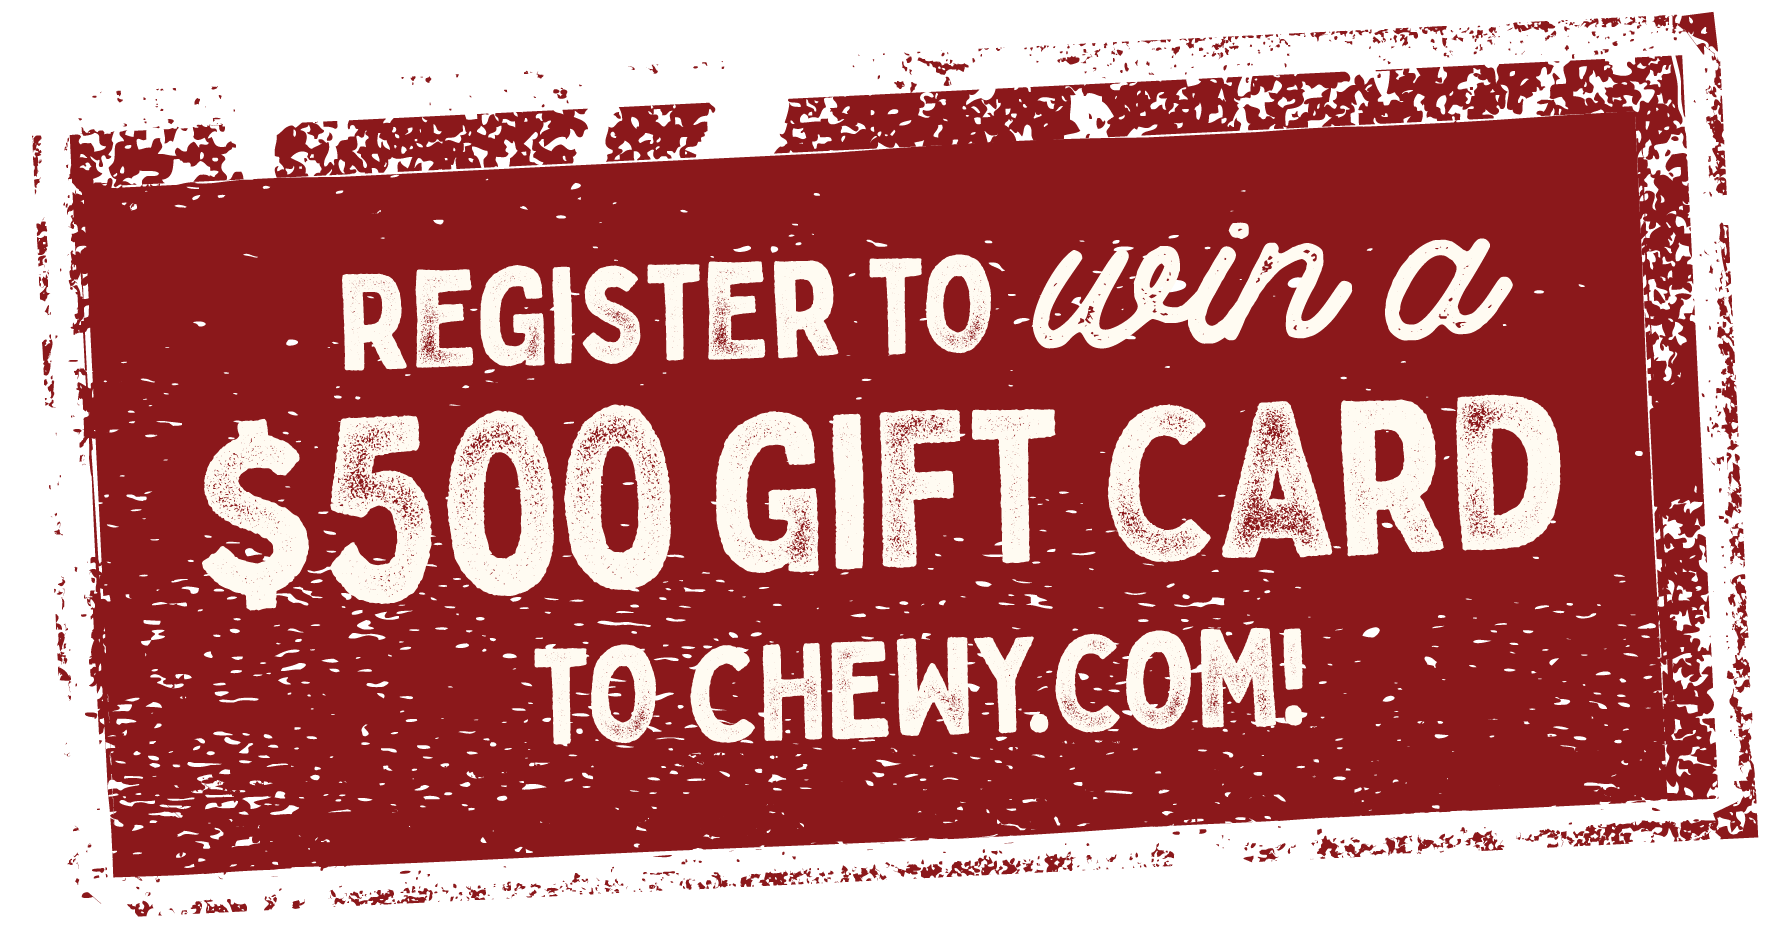 Register to win a 500 gift card to chewy.com